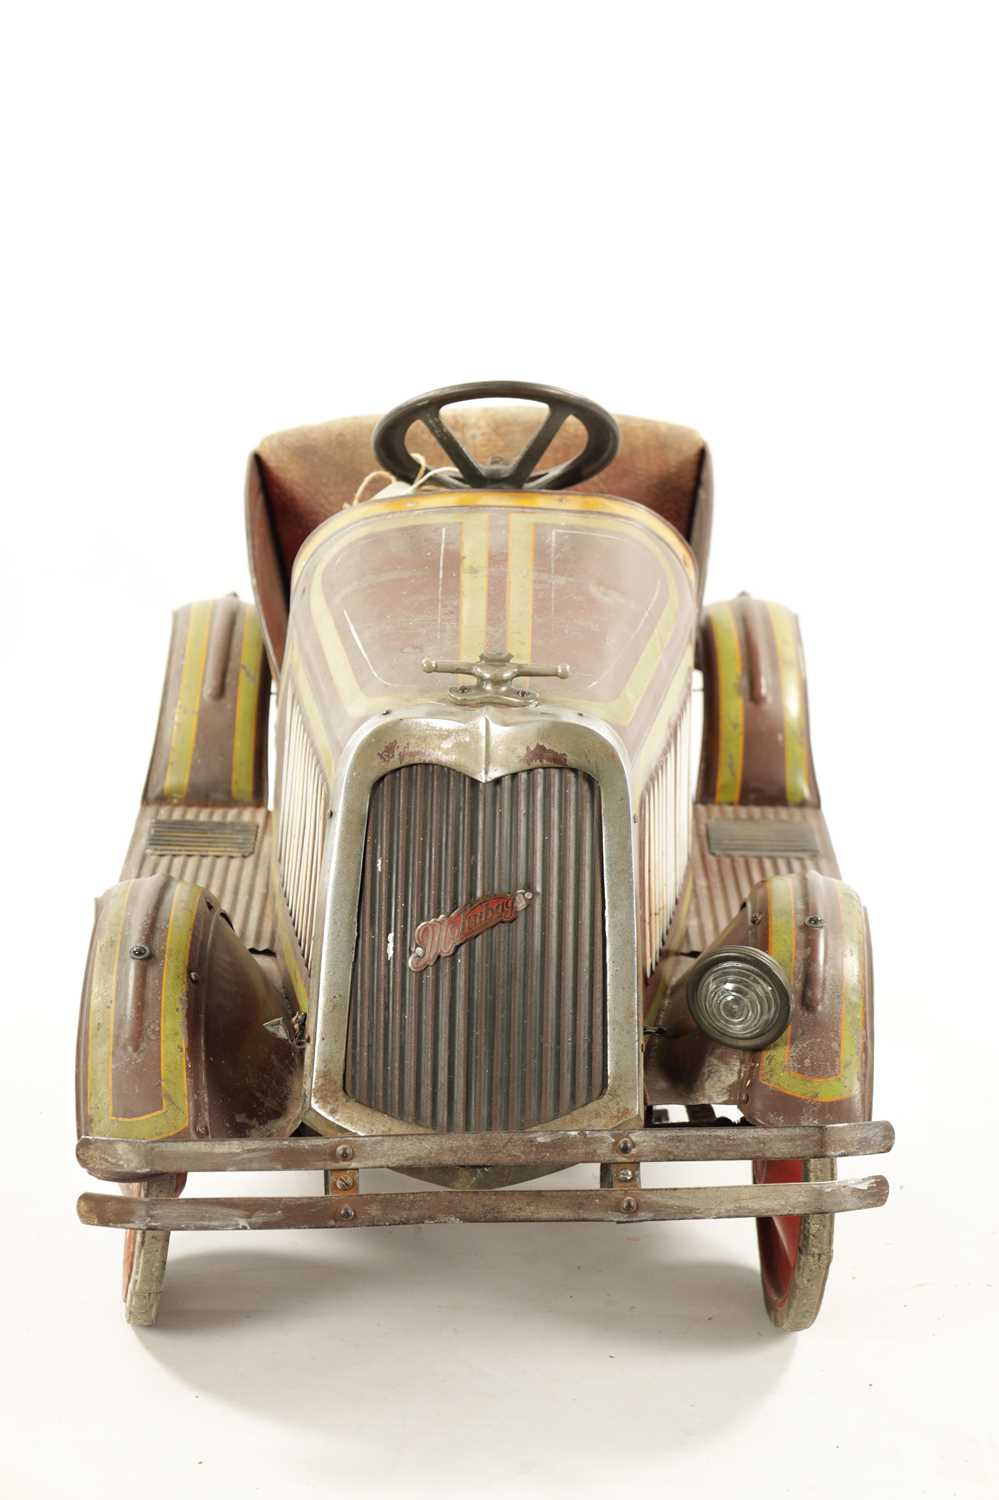 A RARE VINTAGE GERMAN CHILD’S ROADSTER PEDAL CAR CIRCA 1936 - Image 5 of 9